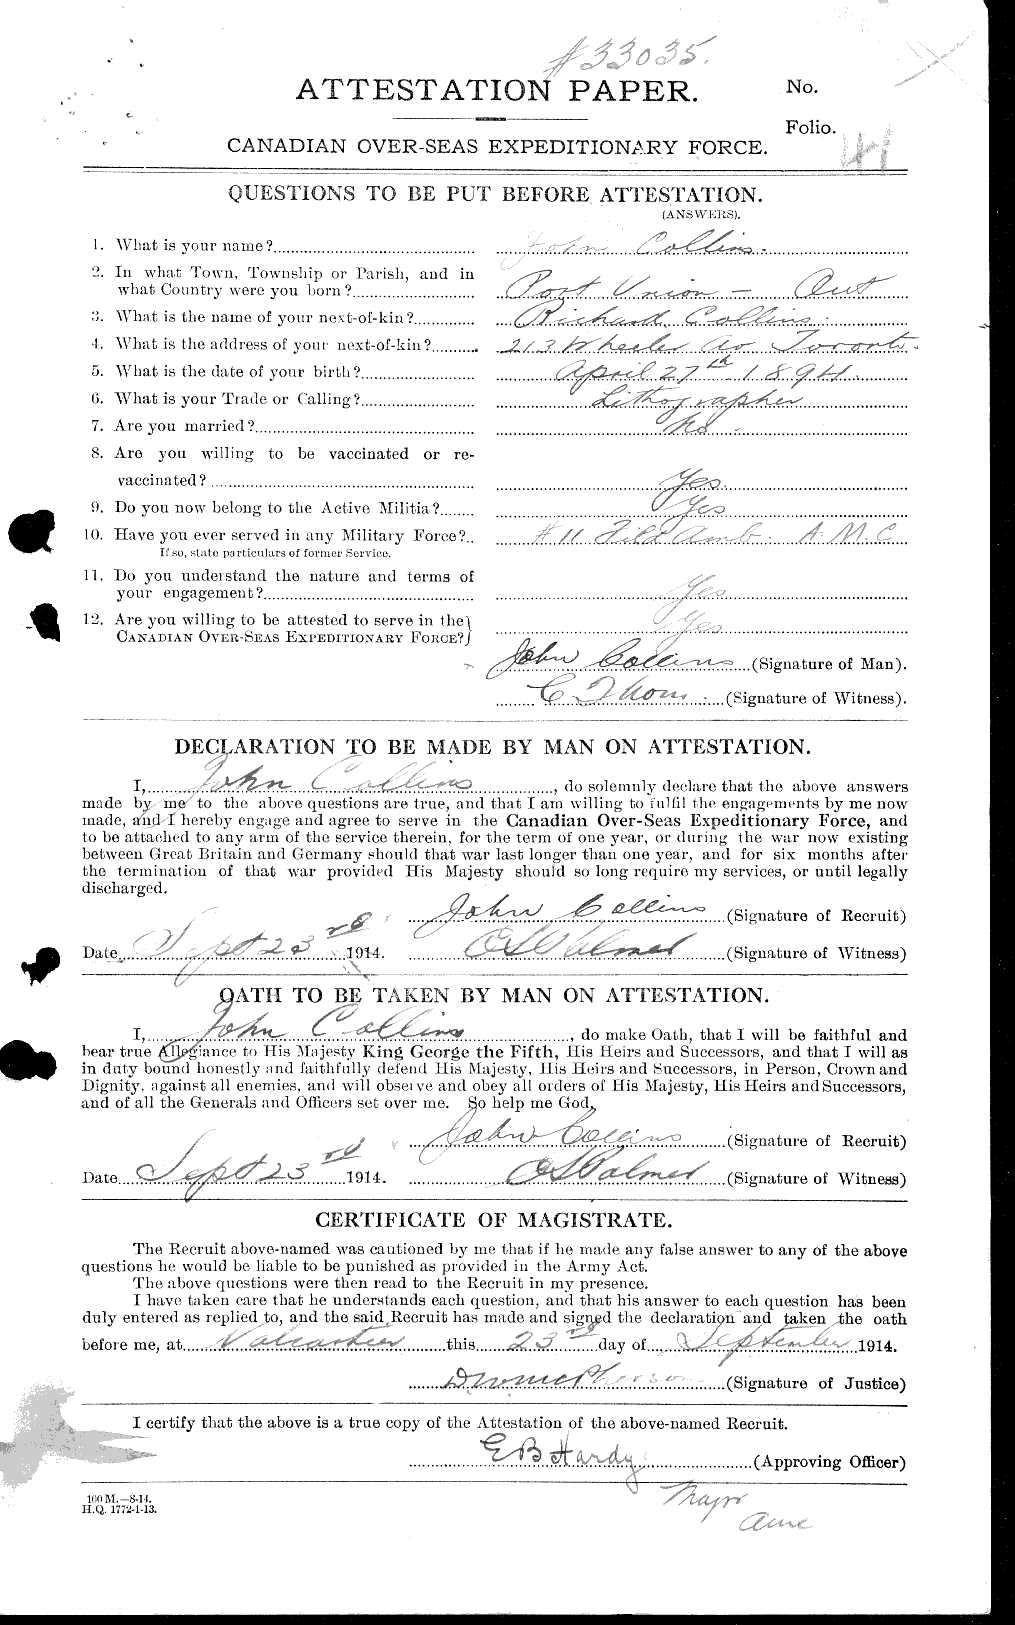 Personnel Records of the First World War - CEF 037968a